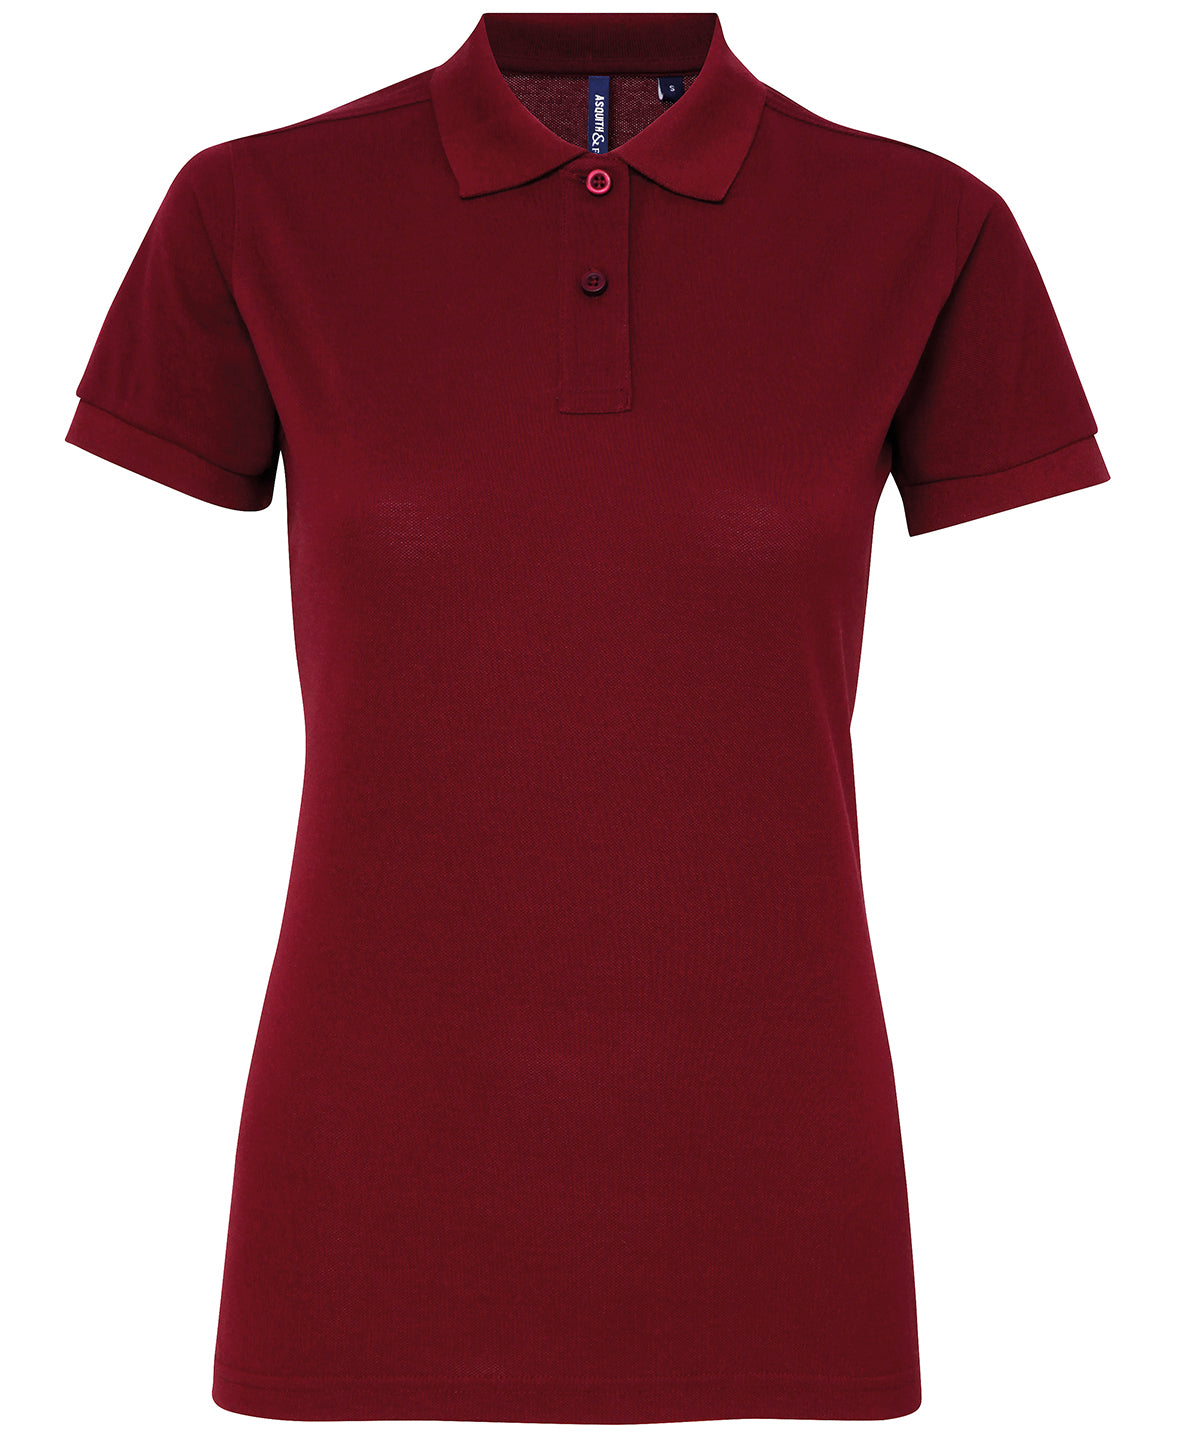 Personalised Polo Shirts - Black Asquith & Fox Women’s polycotton blend polo